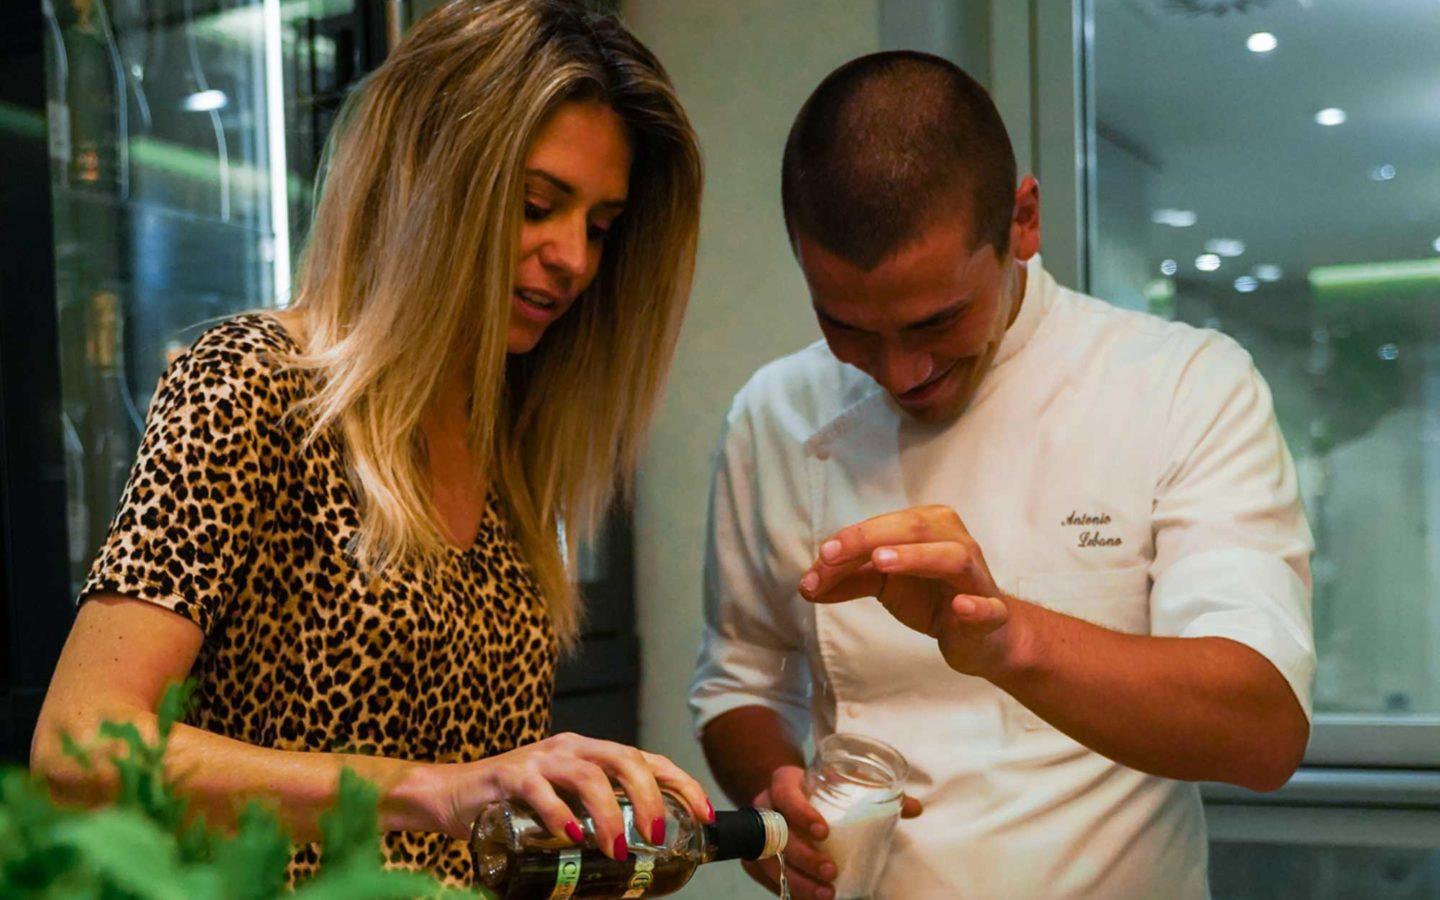 woman with long blonde hair and leopard print shirt cooking with short-haired chef in white shirt